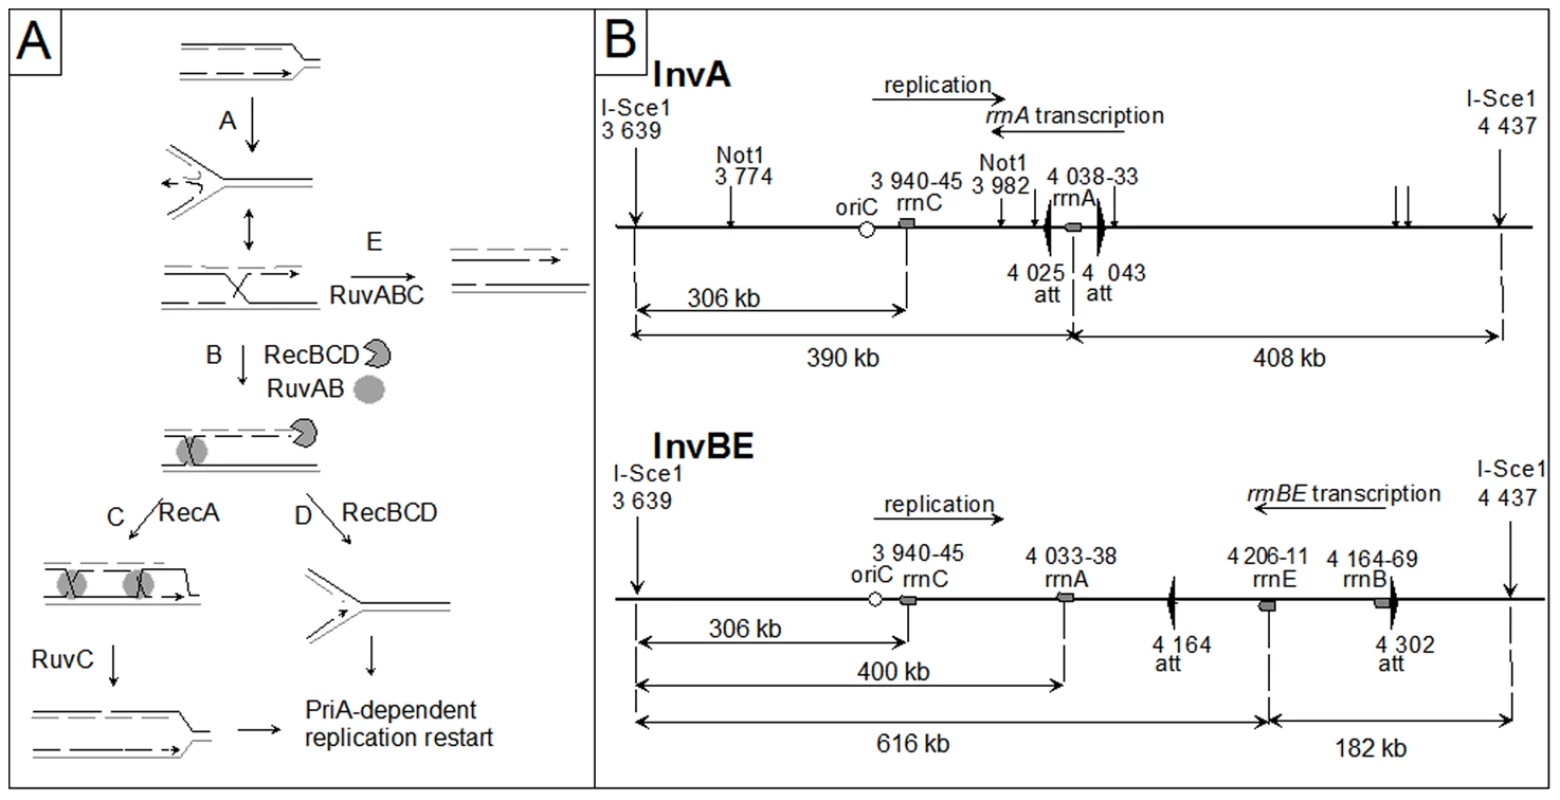 Replication fork reversal model and schematic representation of the I-SceI fragment carrying the inverted region in InvA and InvBE.